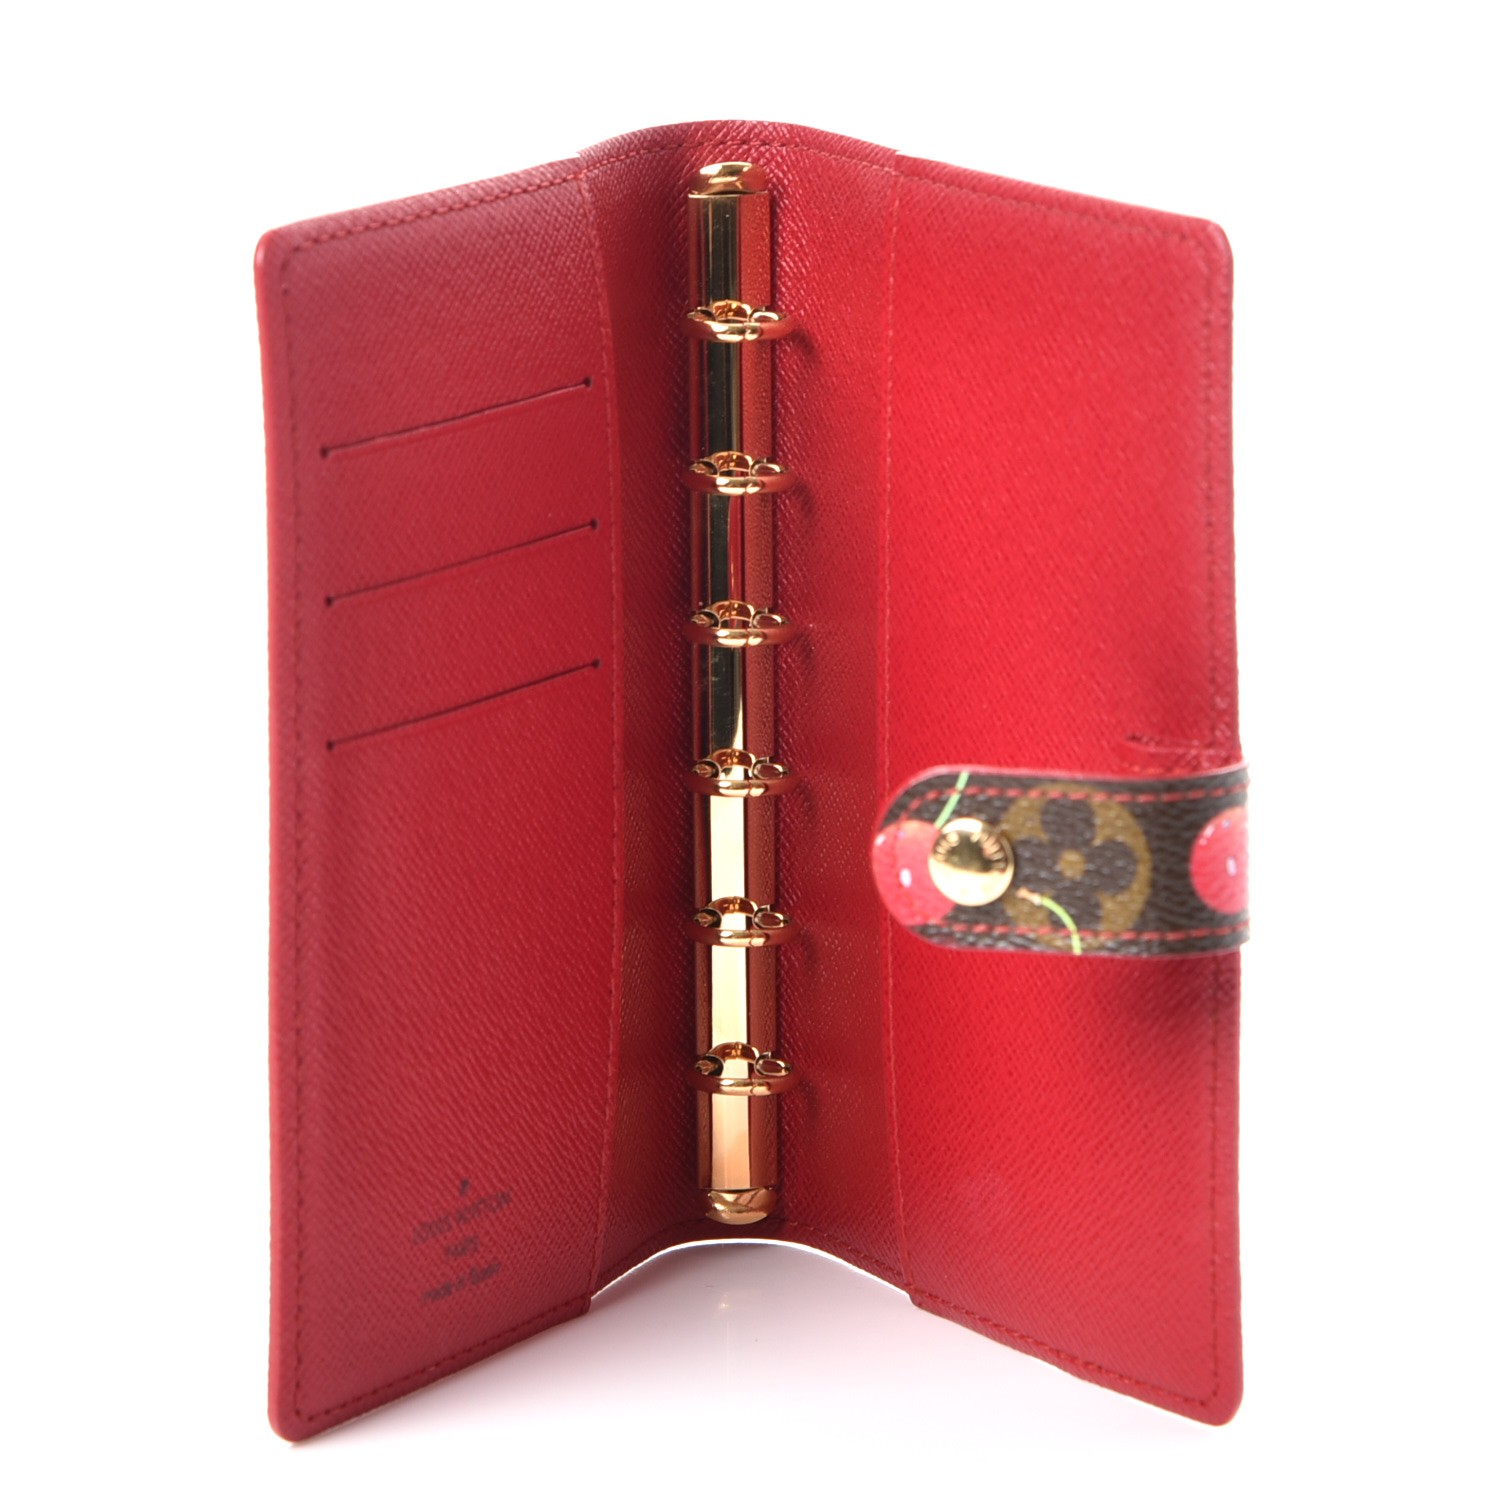 Louis Vuitton MONOGRAM Small Ring Agenda Cover (R20005) by